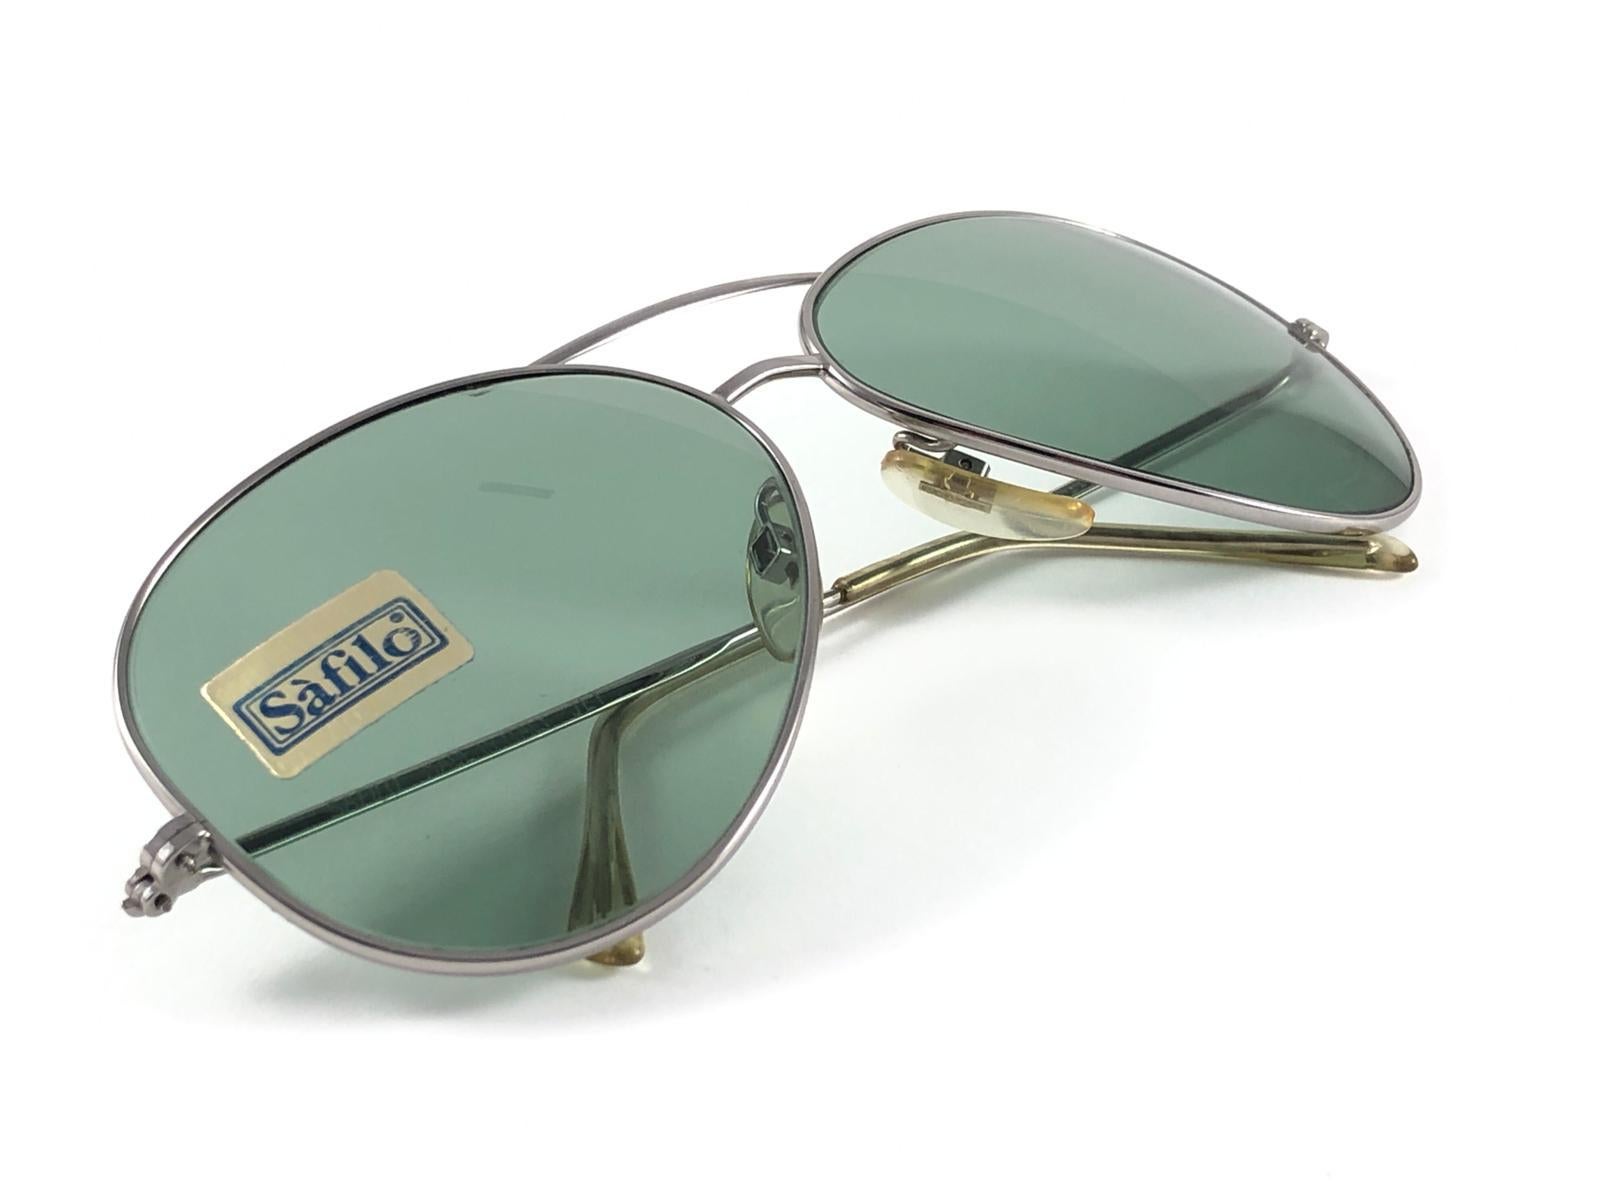 New Vintage Safilo Jet Silver Aviator Frame 1980's Sunglasses Made in Italy For Sale 7